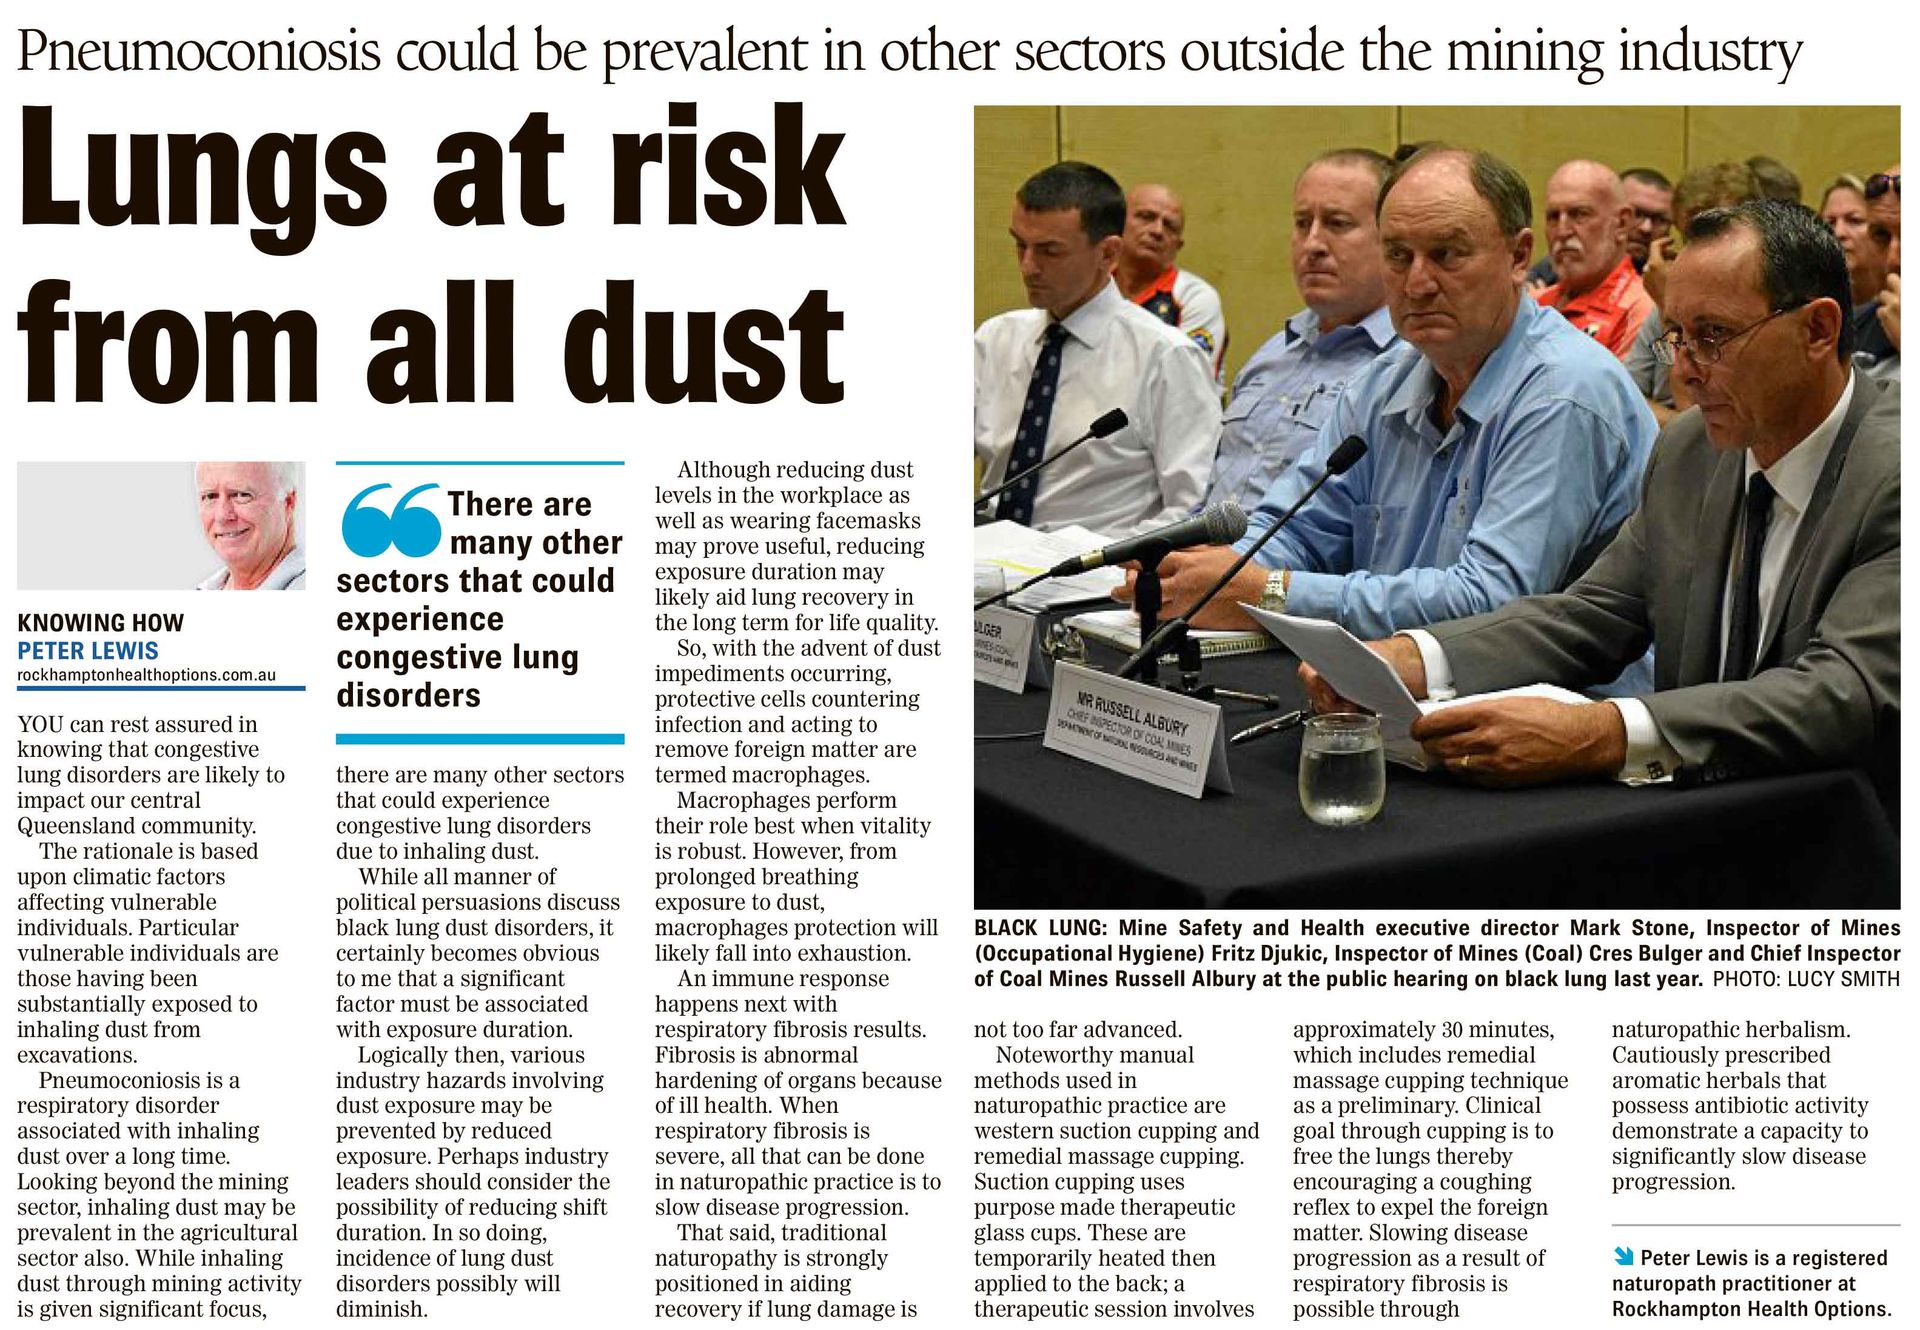 Article on lungs at risk from all dust